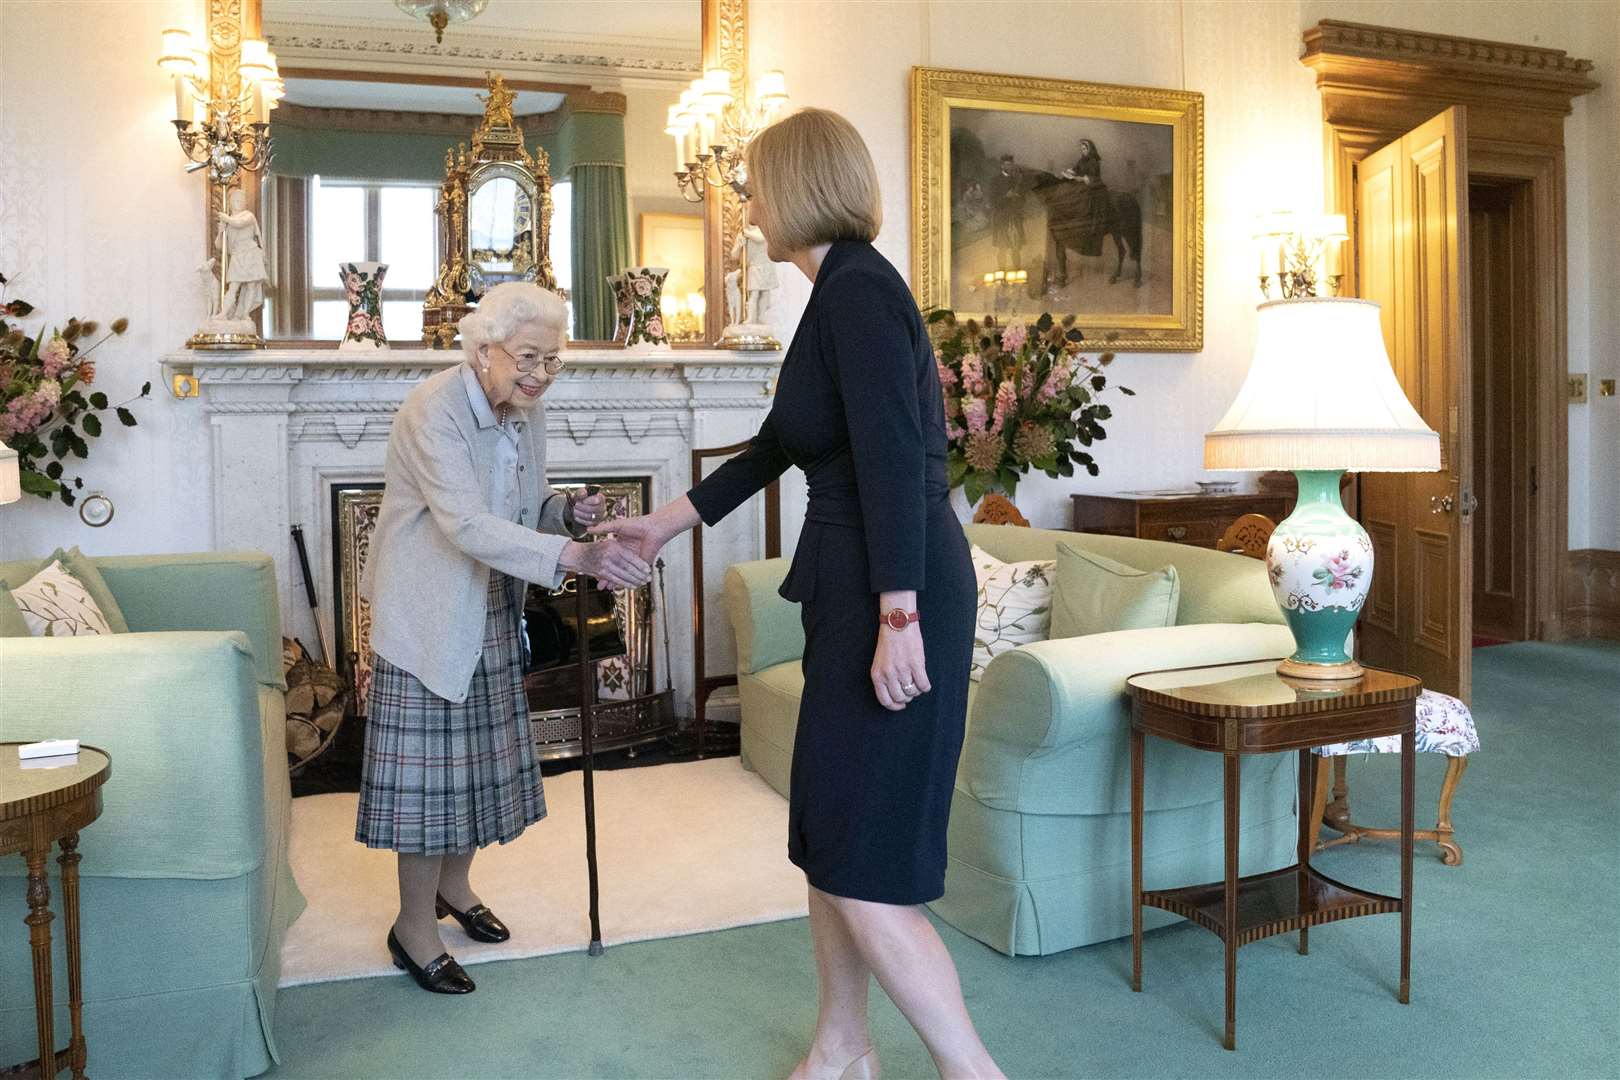 The Queen welcomed Liz Truss during an audience at Balmoral, where she invited the newly elected Conservative Party leader to become PM (Jane Barlow/PA)